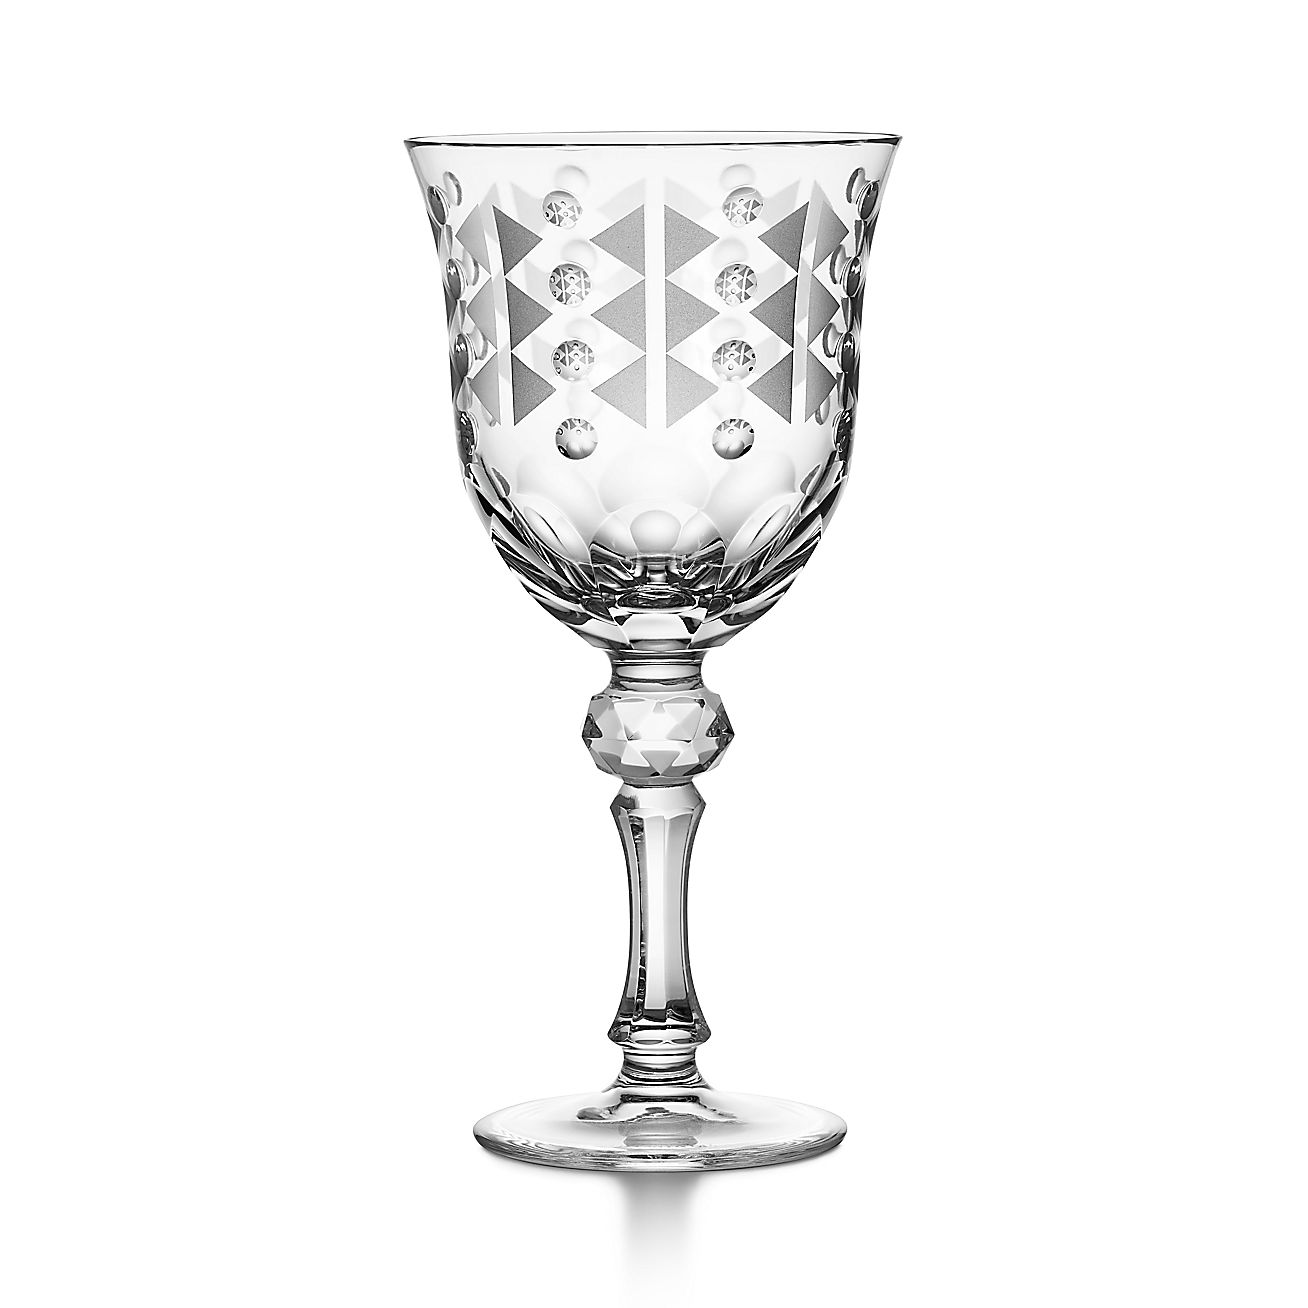 True Stemmed Wine Glasses, Lead-free Crystal Glassware For Red And